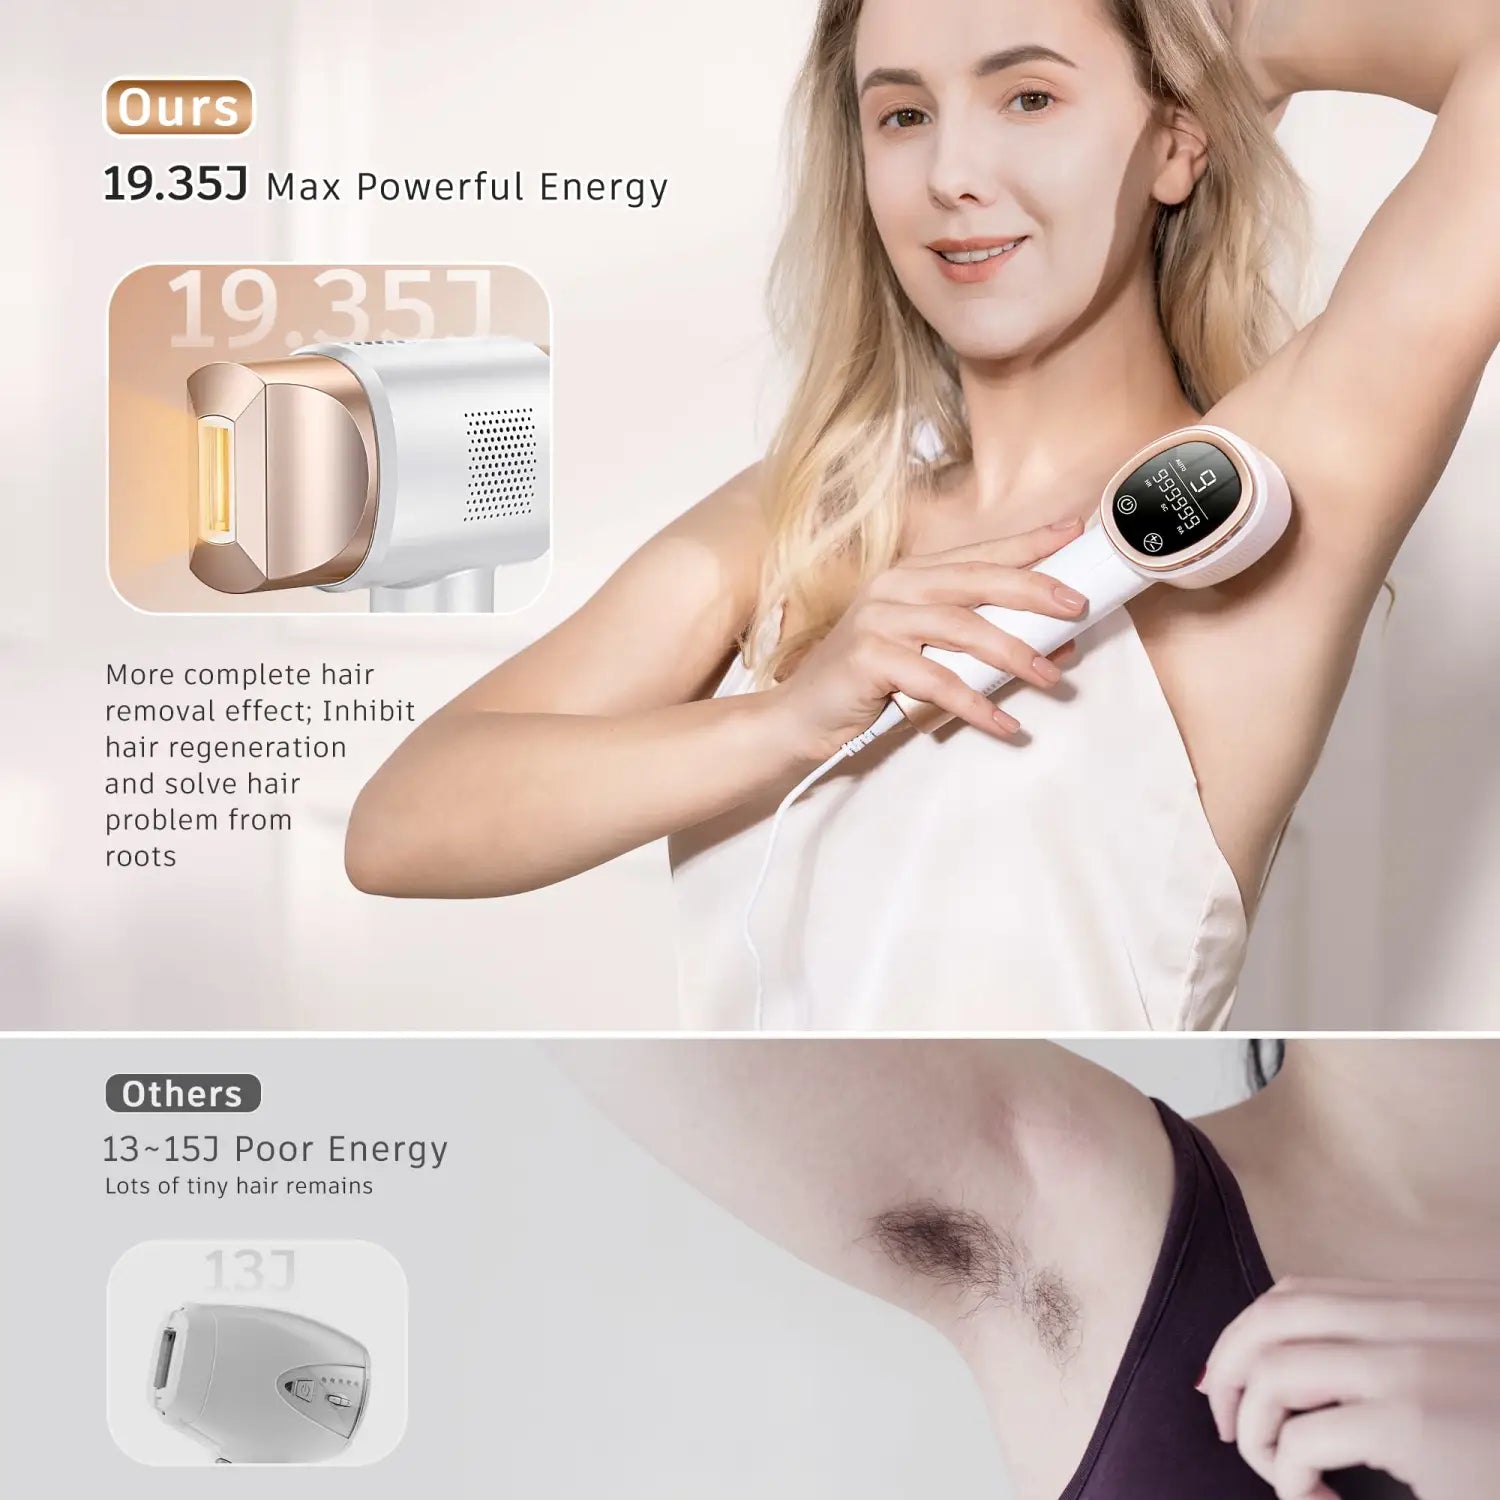 Aminzer ipl laser hair removal 999,999 flashes 3 in 1 epilator - laser hair removal